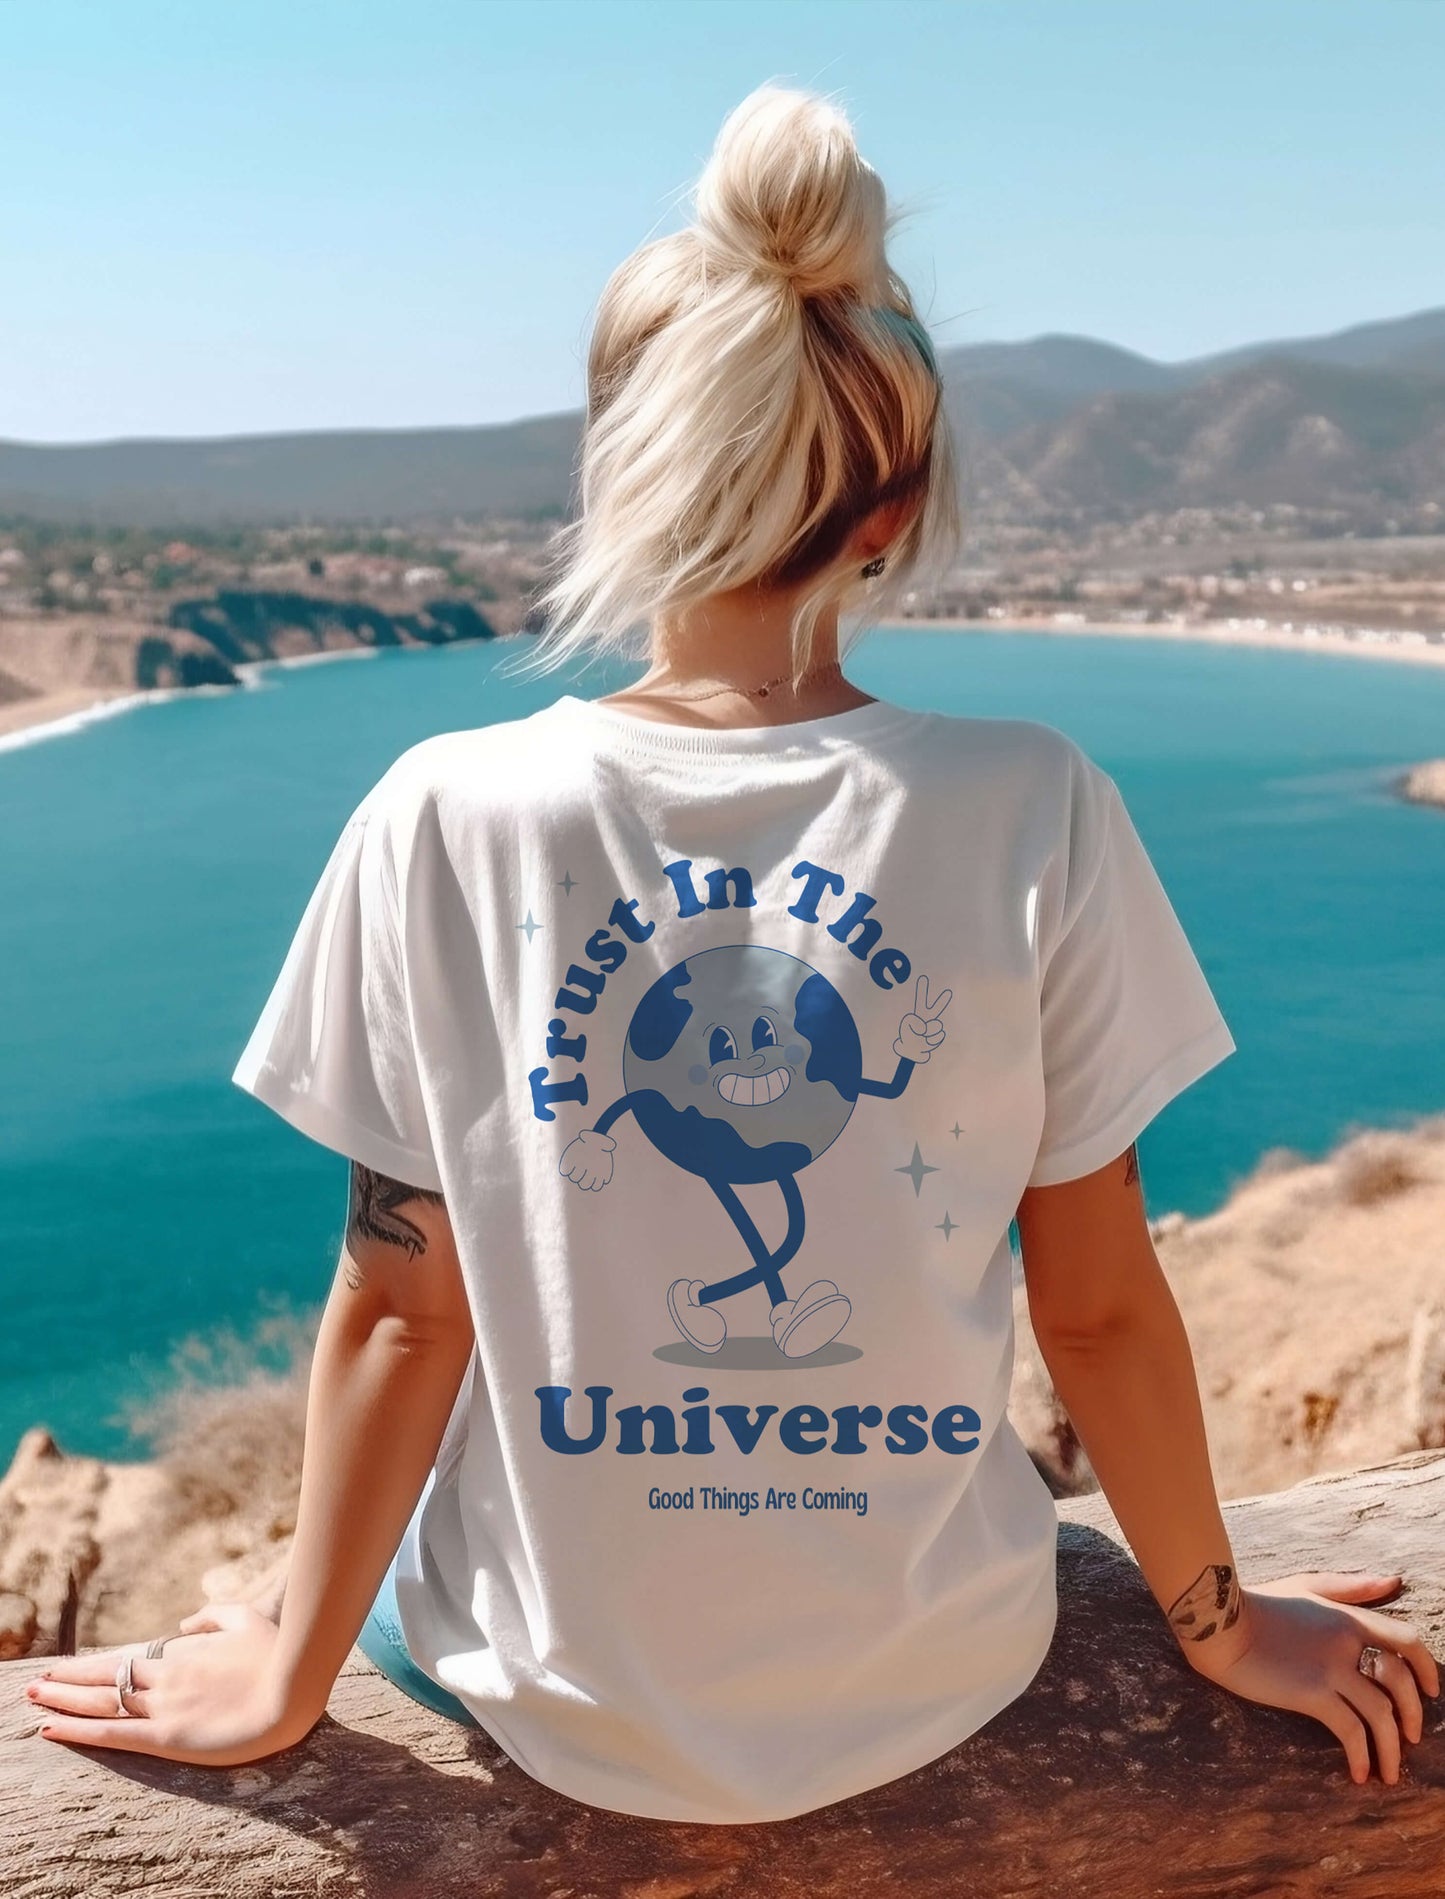 Trust in the universe tee, positive t-shirt, affirmation clothing